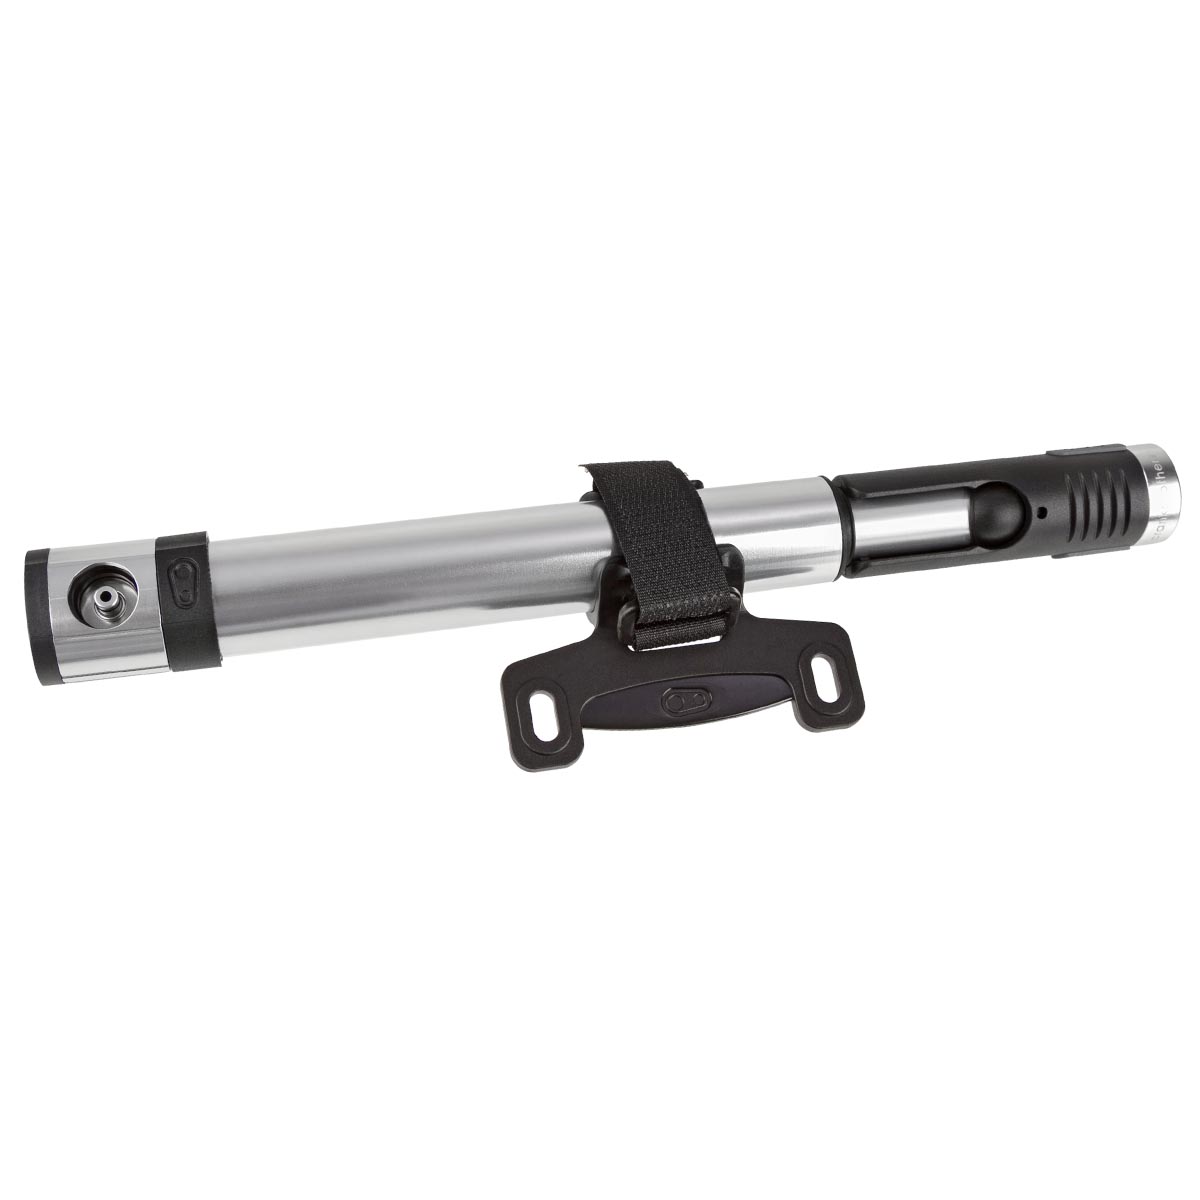 Crankbrothers Hand Pump Klic HV Silver, CO2-pump, incl. frame mounting